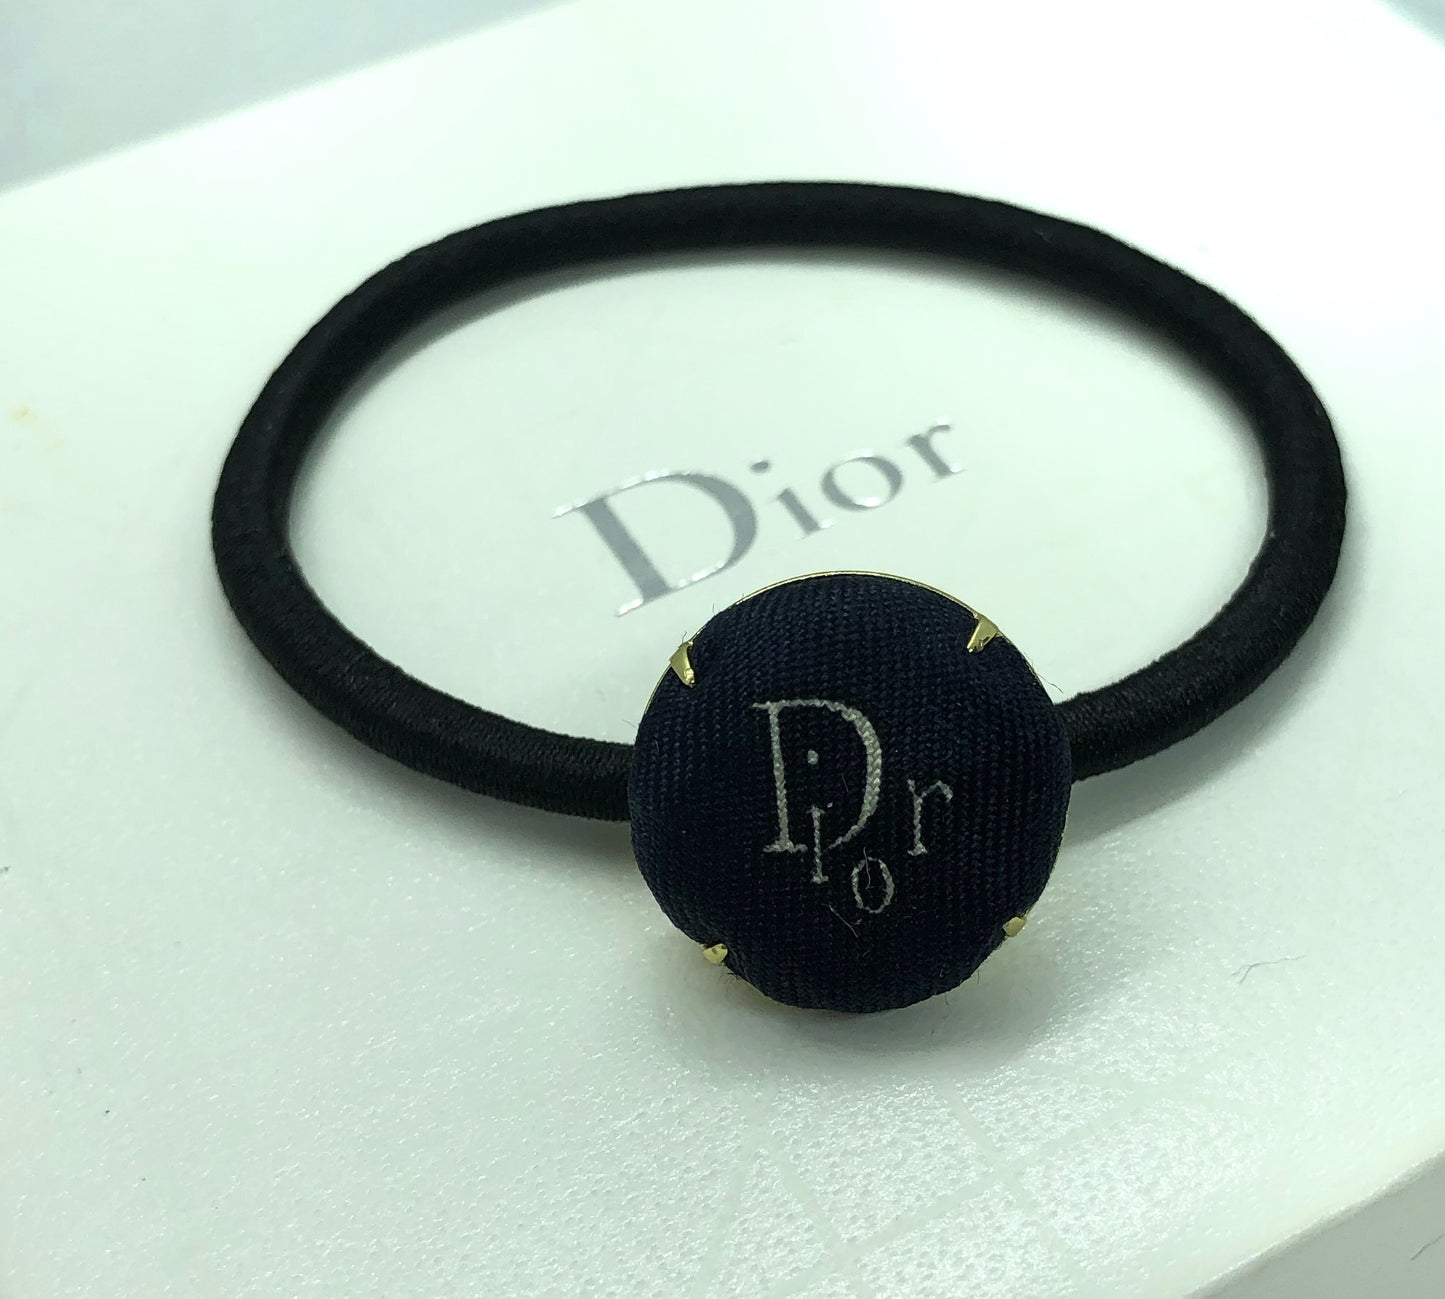 D-D Navy & Red Logo- XS hairband